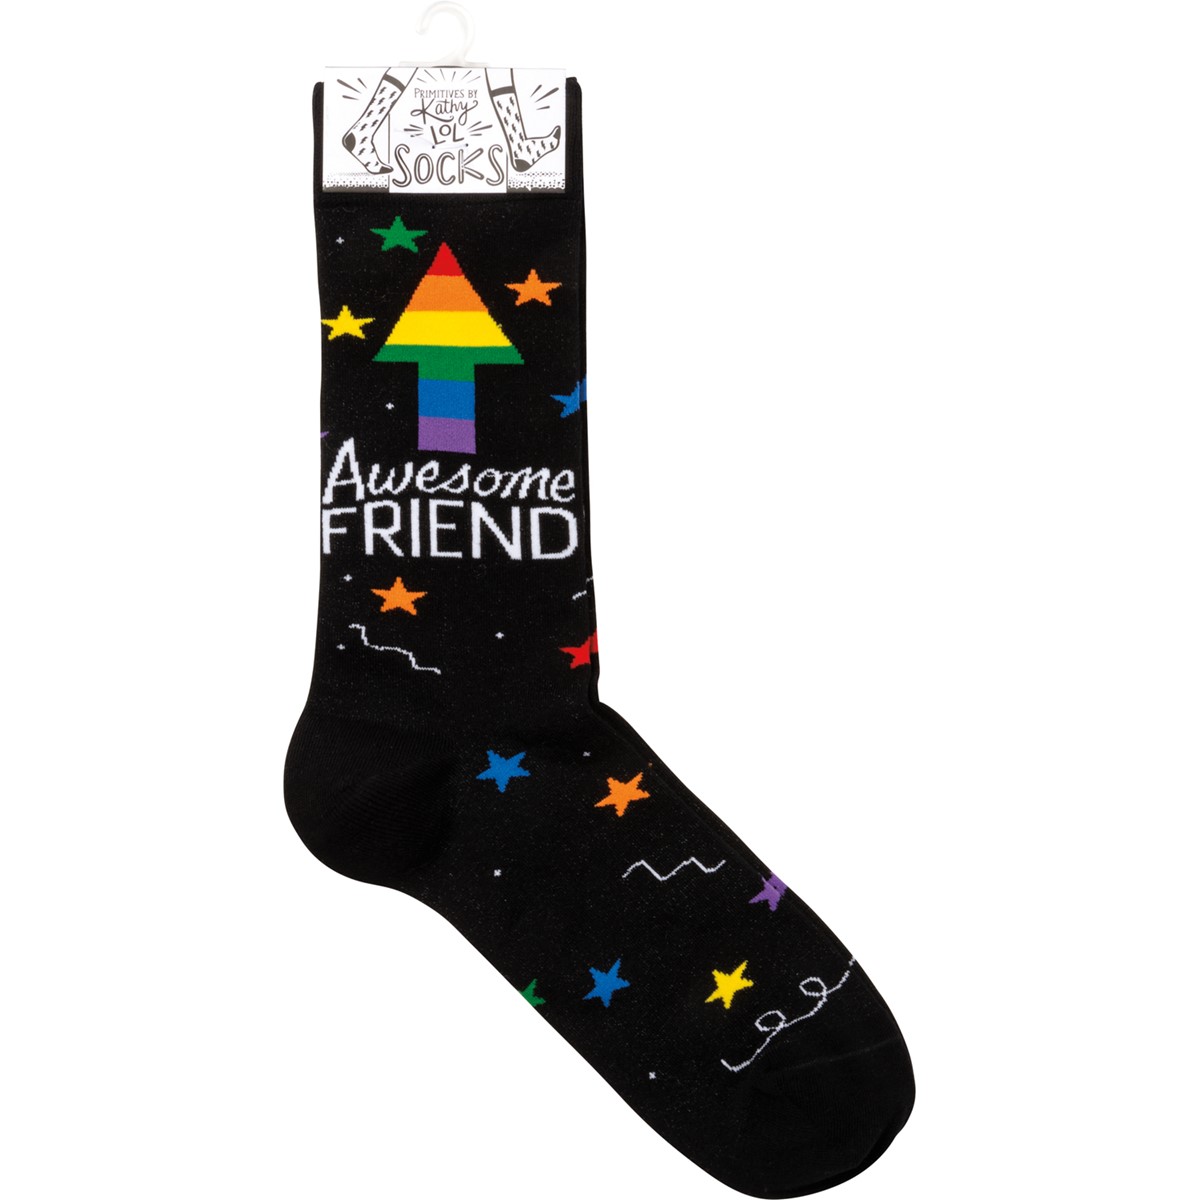 Socks - Awesome Friend Stars - One Size Fits Most - Cotton, Nylon, Spandex